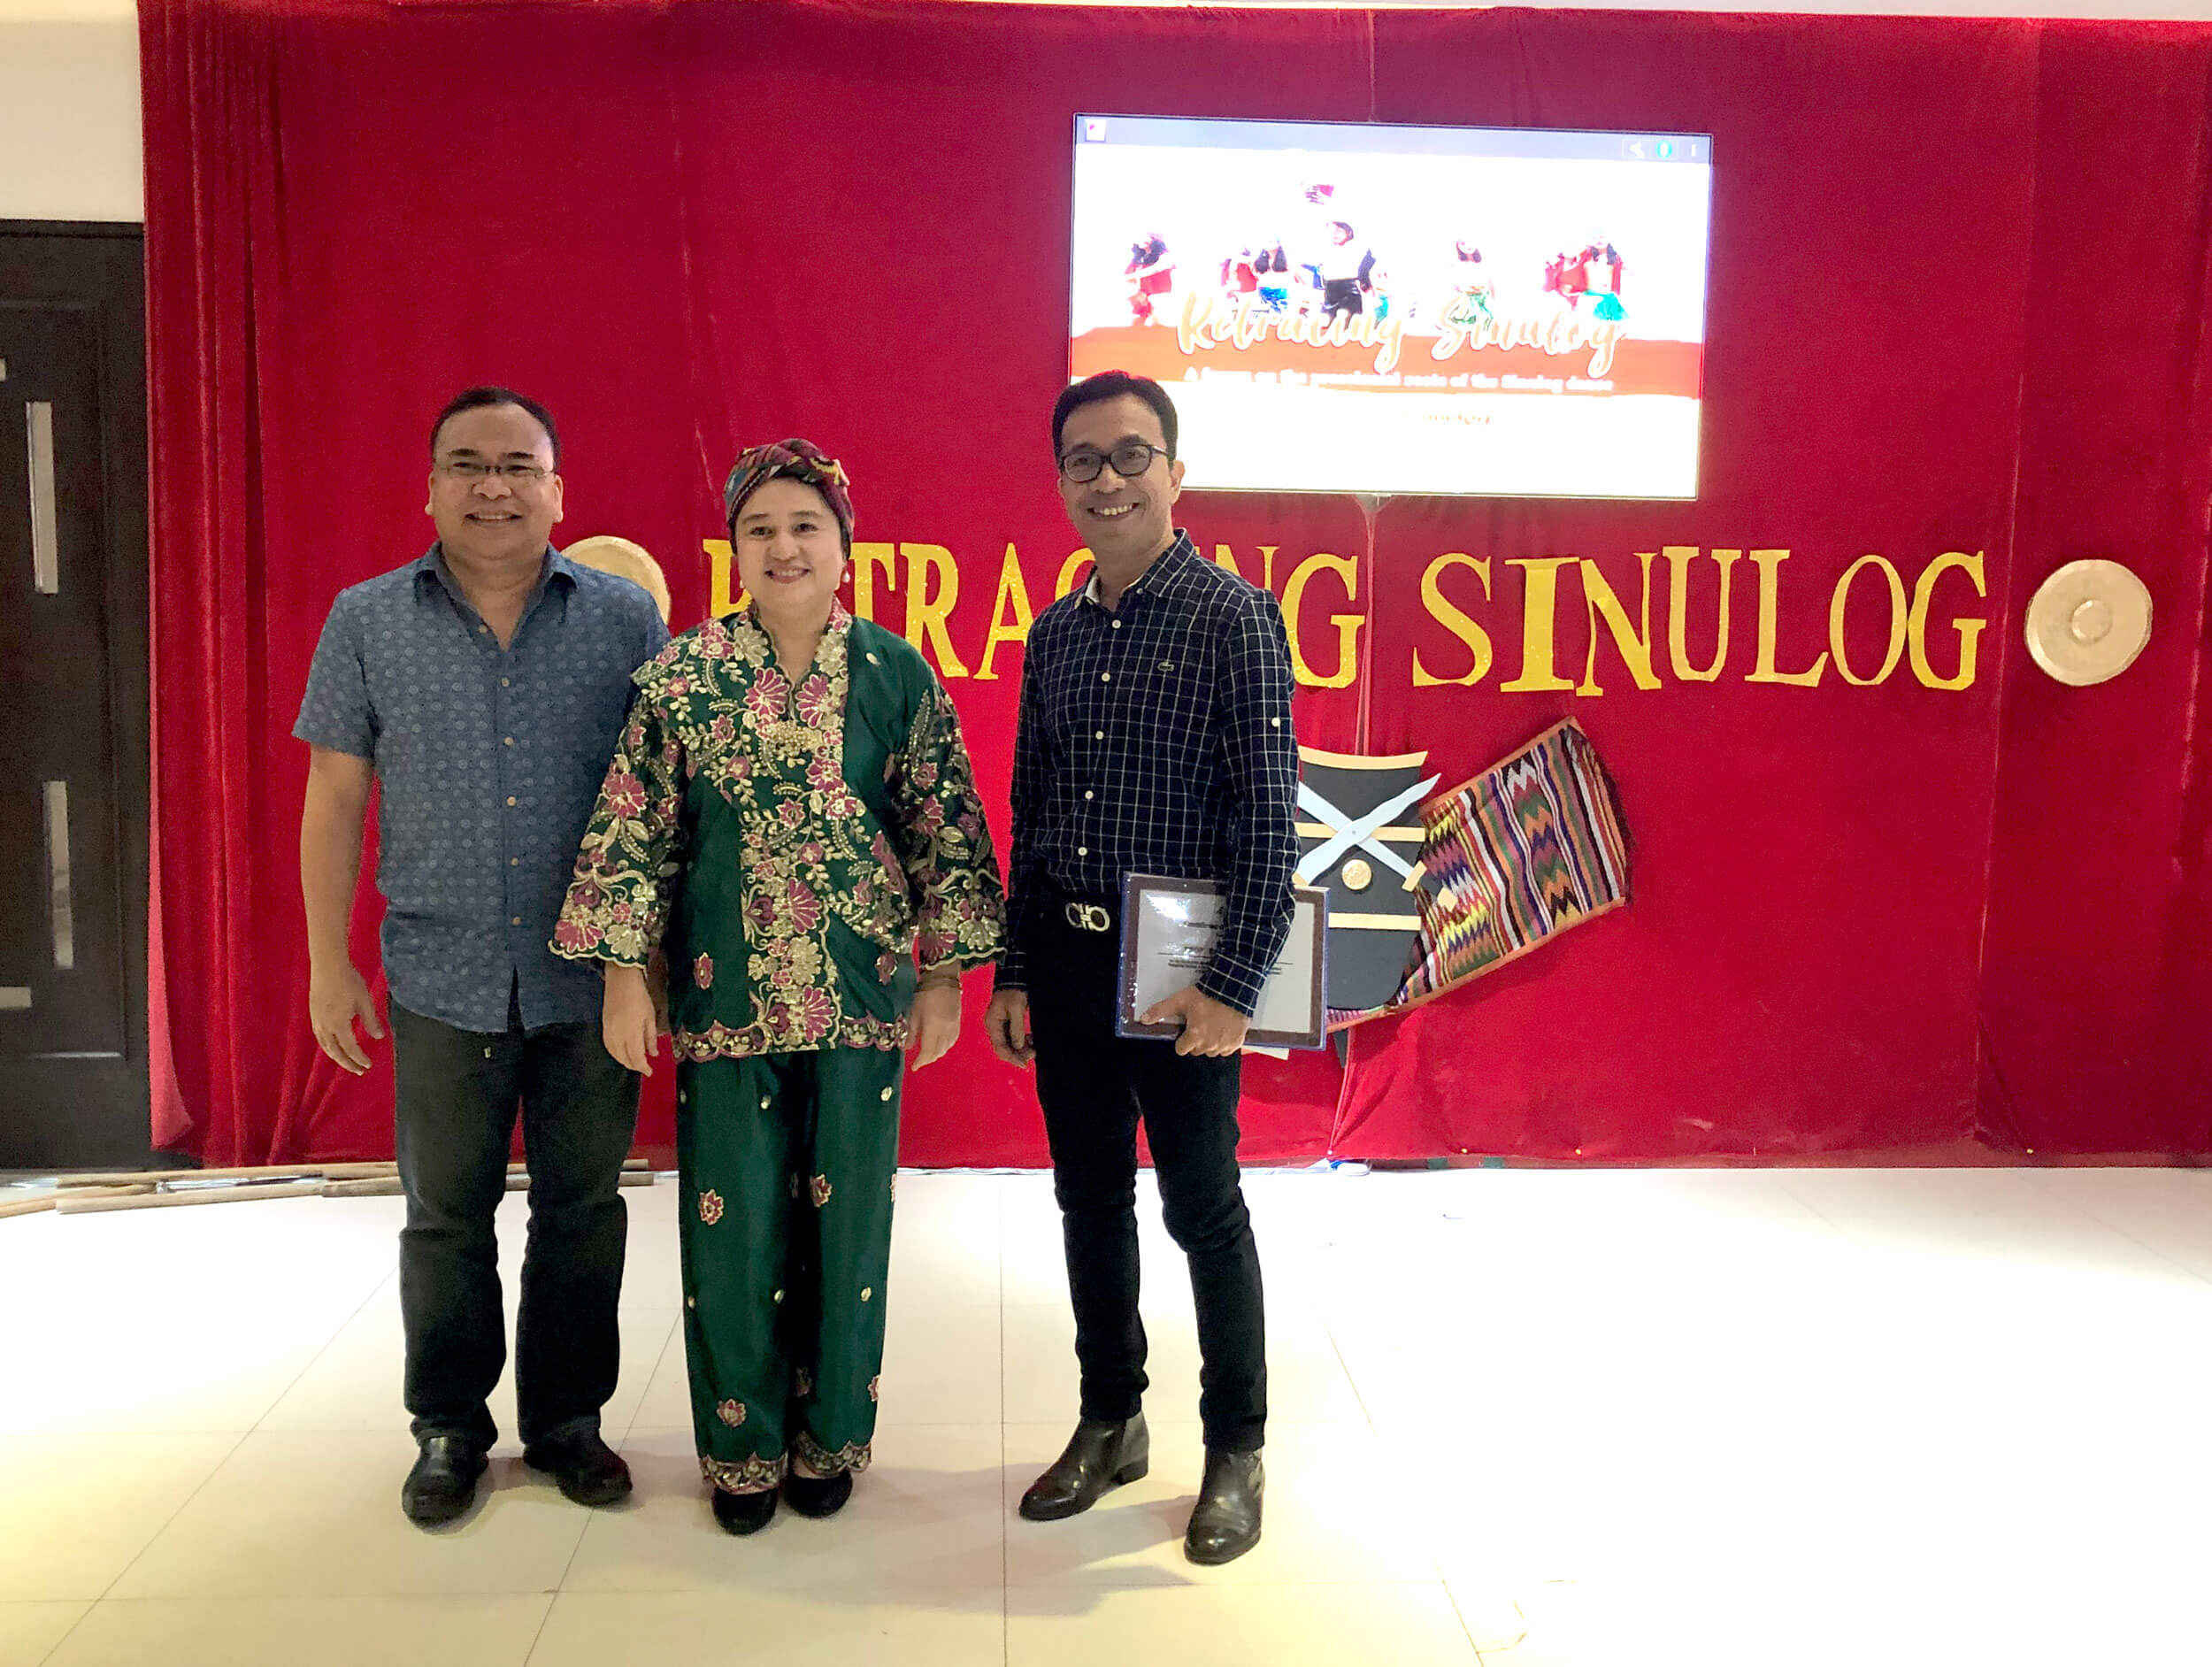 TRACING ROOTS OF SINULOG. (From left) Professor Jose Jose Eleazar Bersales, Caridad Guivelondo of Palm Grass Hotel, and Professor Darwin Absari after the forum on Sinulog held at the downtown Cebu City hotel that is known for its strong support of heritage and culture.